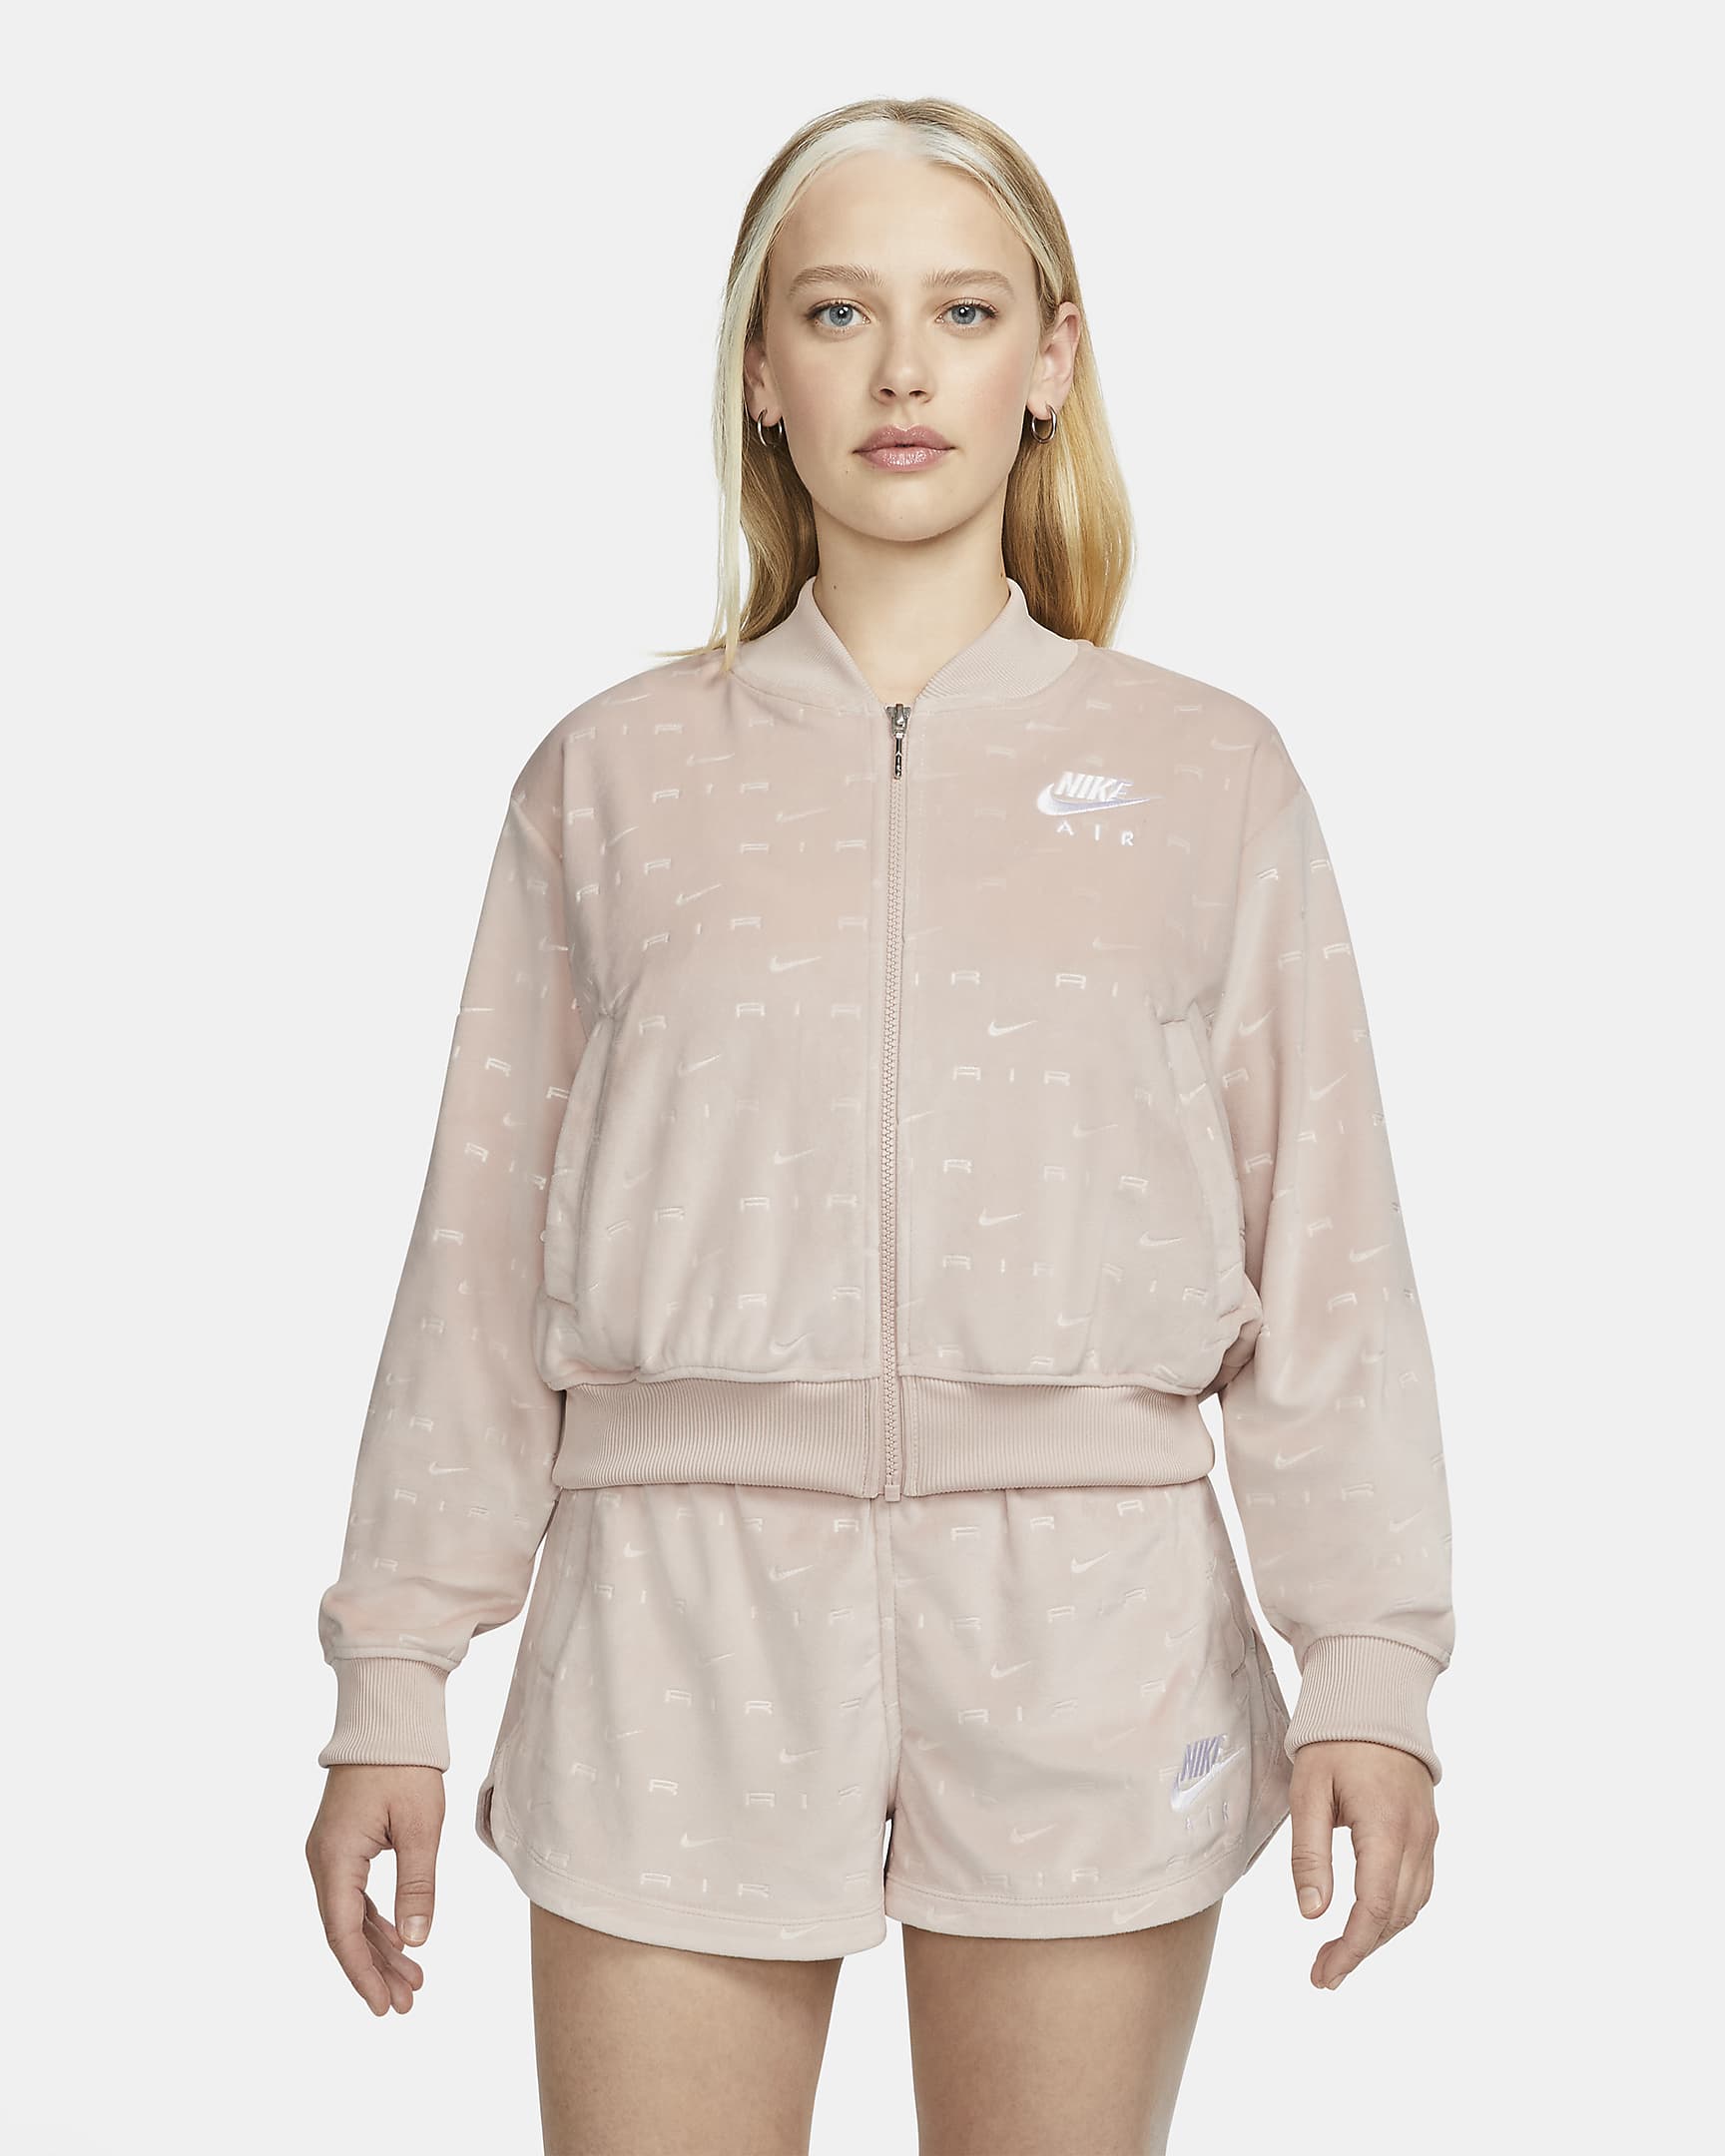 nike-air-womens-velour-jacket-4lXkv0.png